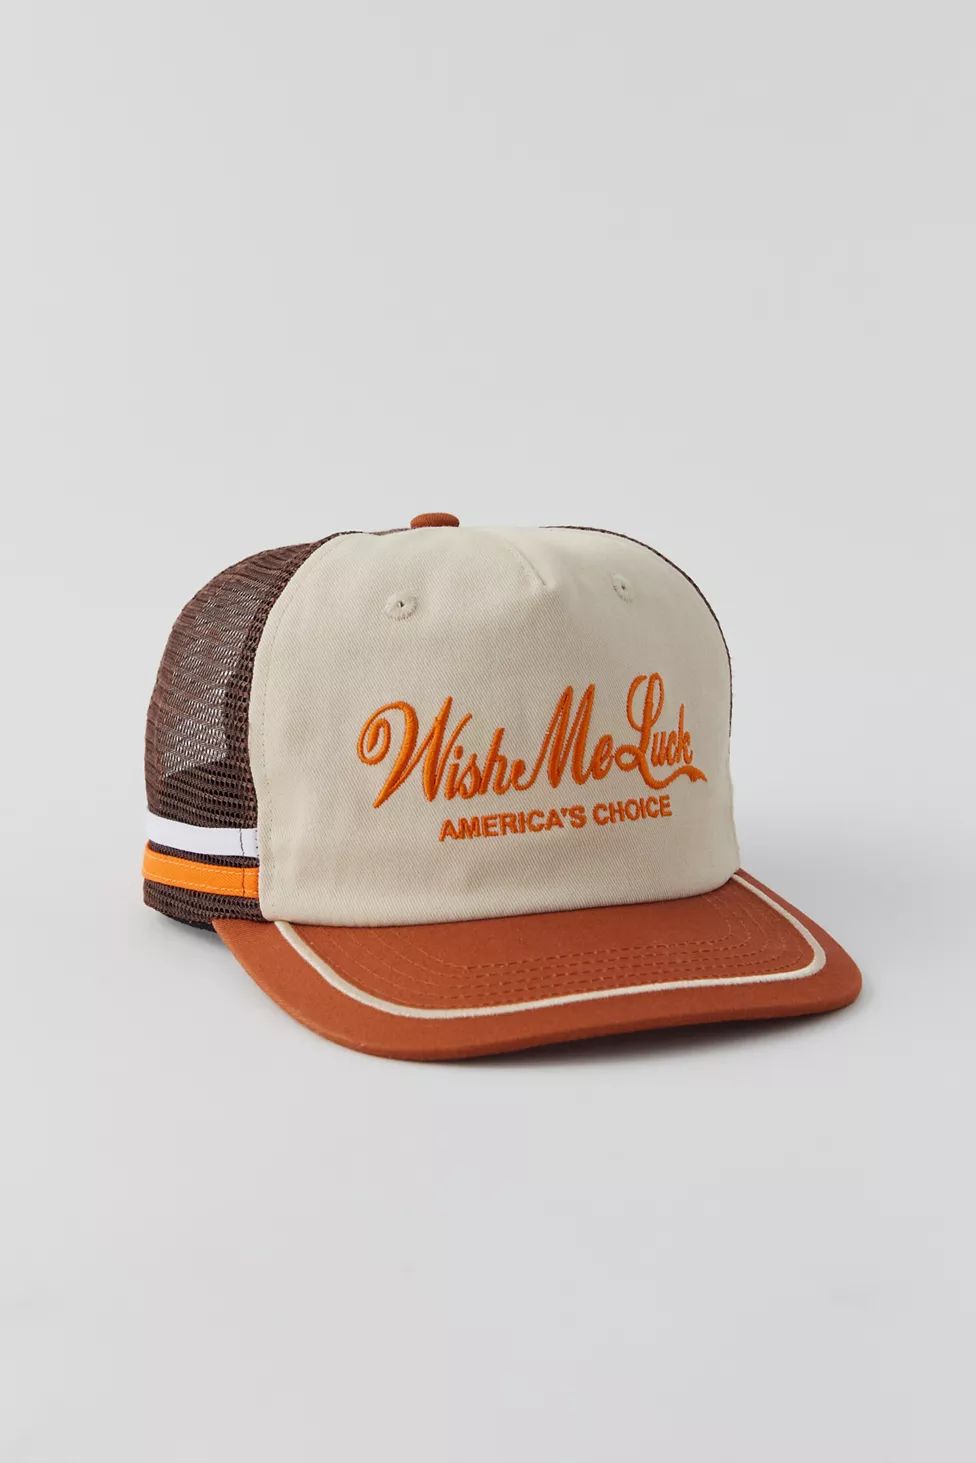 Wish Me Luck America’s Choice Trucker Hat | Urban Outfitters (US and RoW)